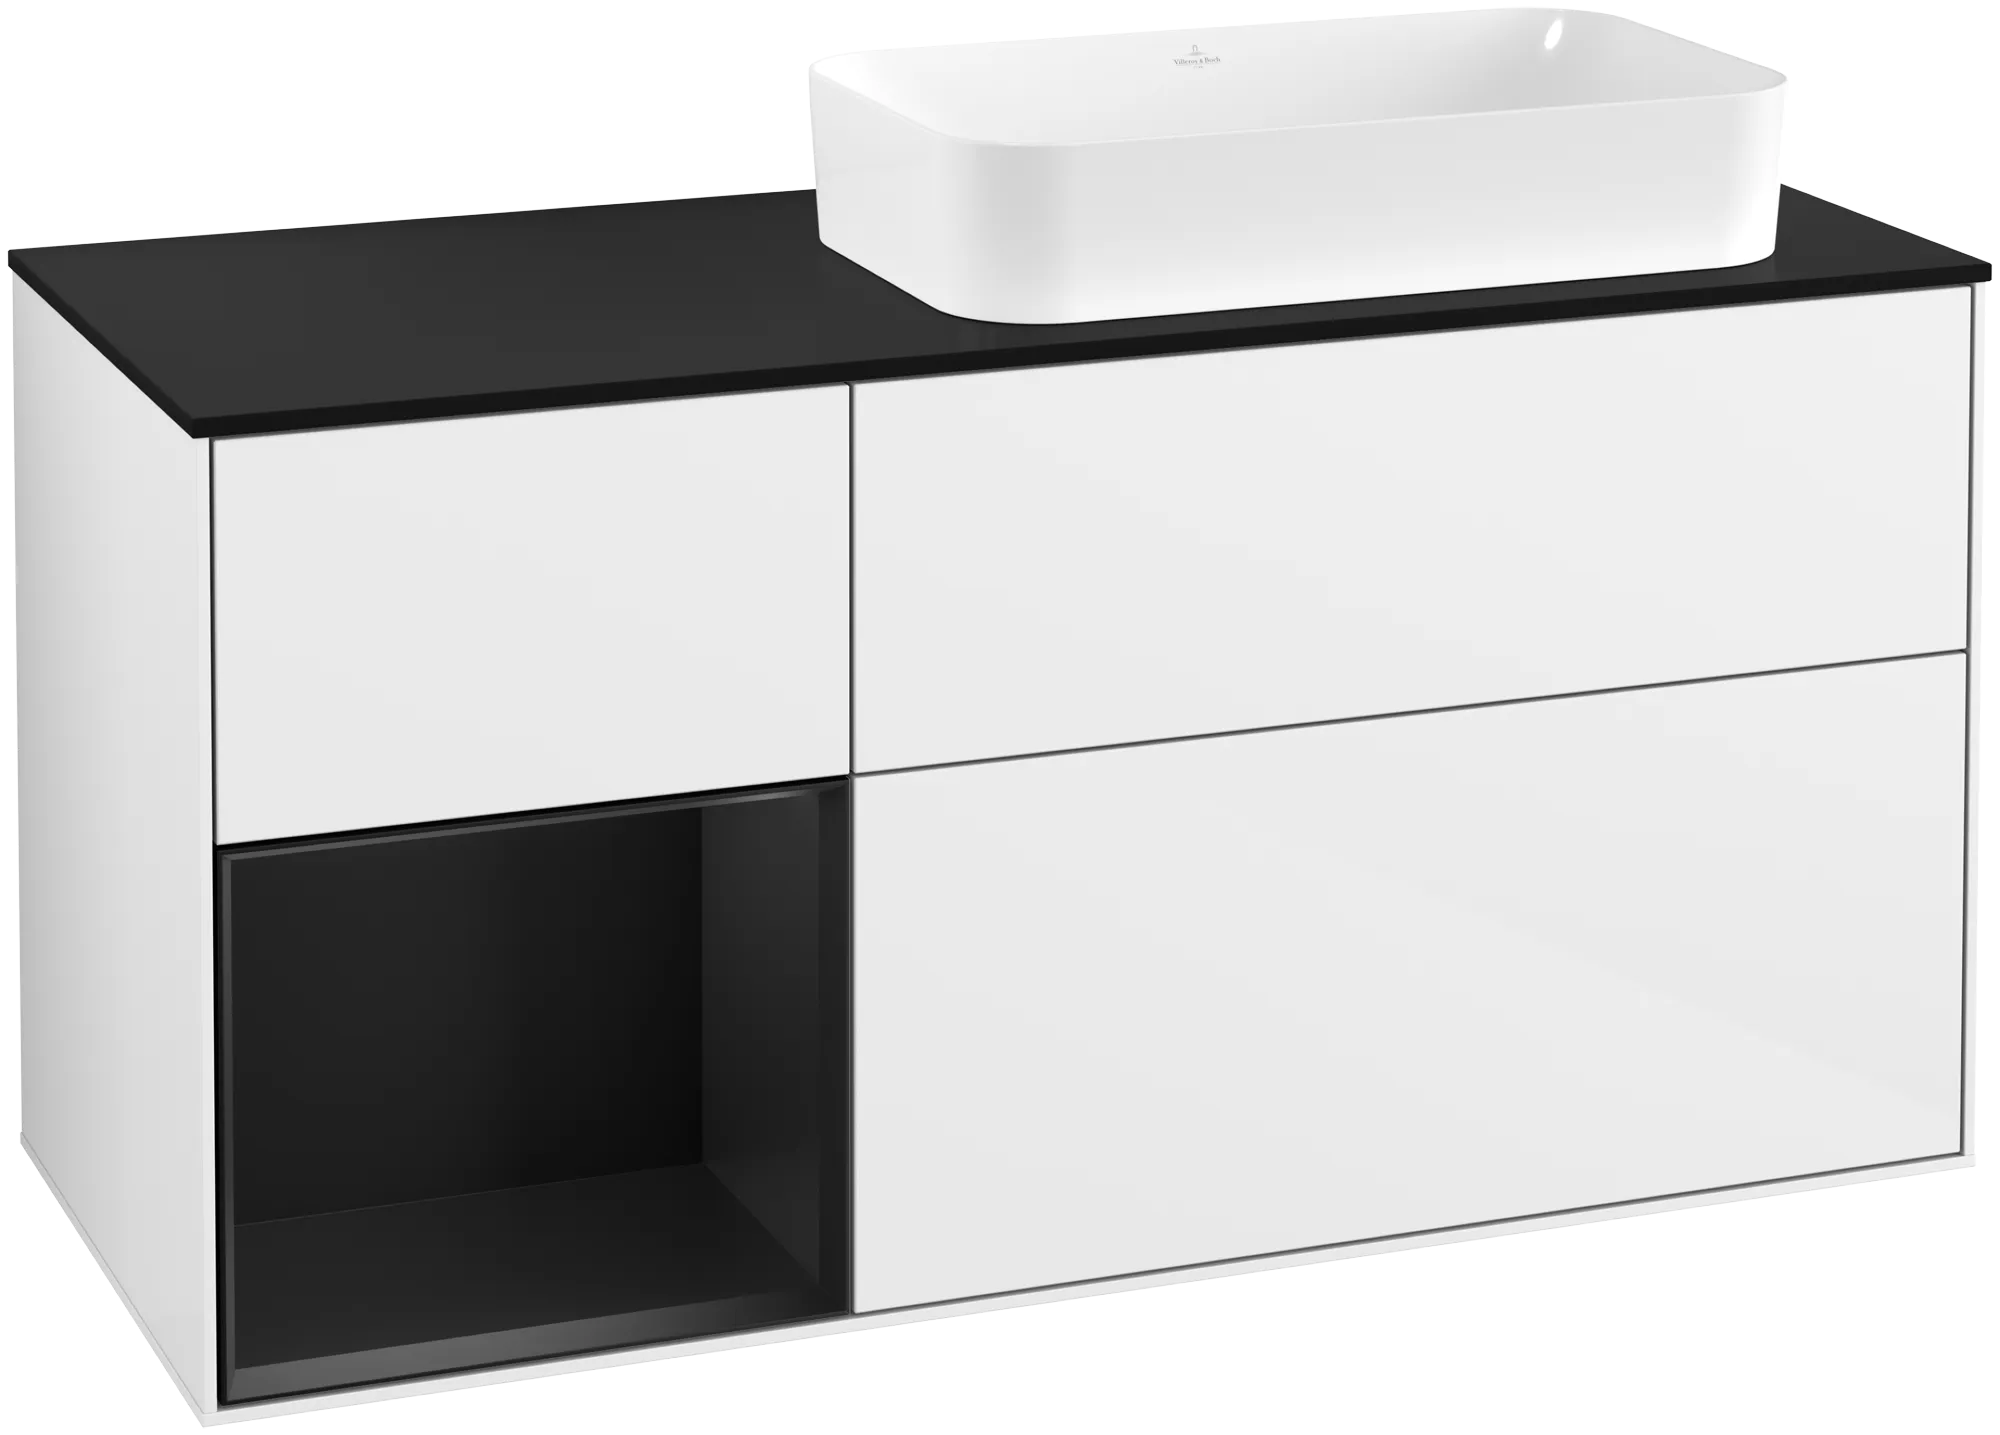 Picture of VILLEROY BOCH Finion Vanity unit, with lighting, 3 pull-out compartments, 1200 x 603 x 501 mm, Glossy White Lacquer / Black Matt Lacquer / Glass Black Matt #G682PDGF